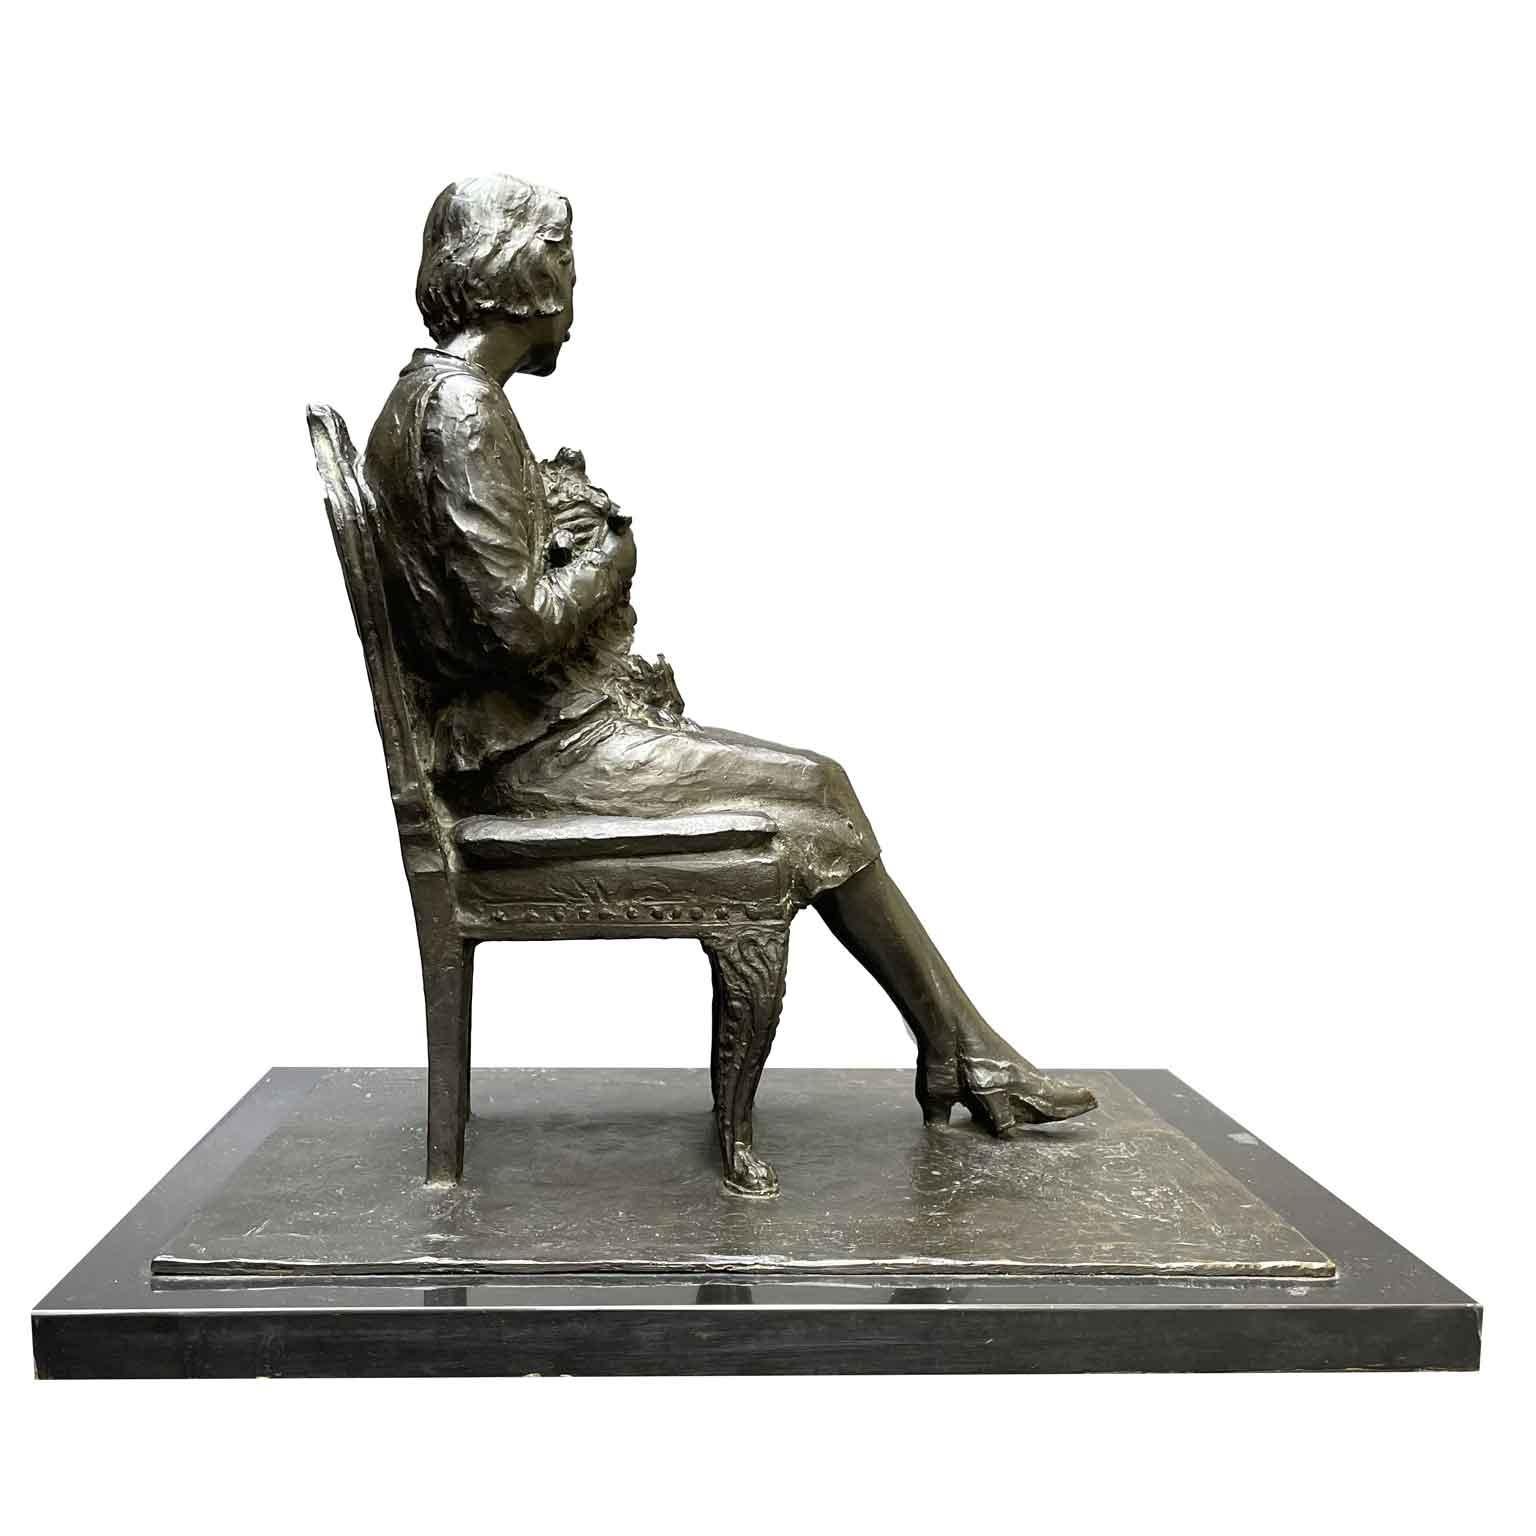 20th Century Seated Lady with Dog in Arm Bronze Sculpture Leonardo Secchi 1942 For Sale